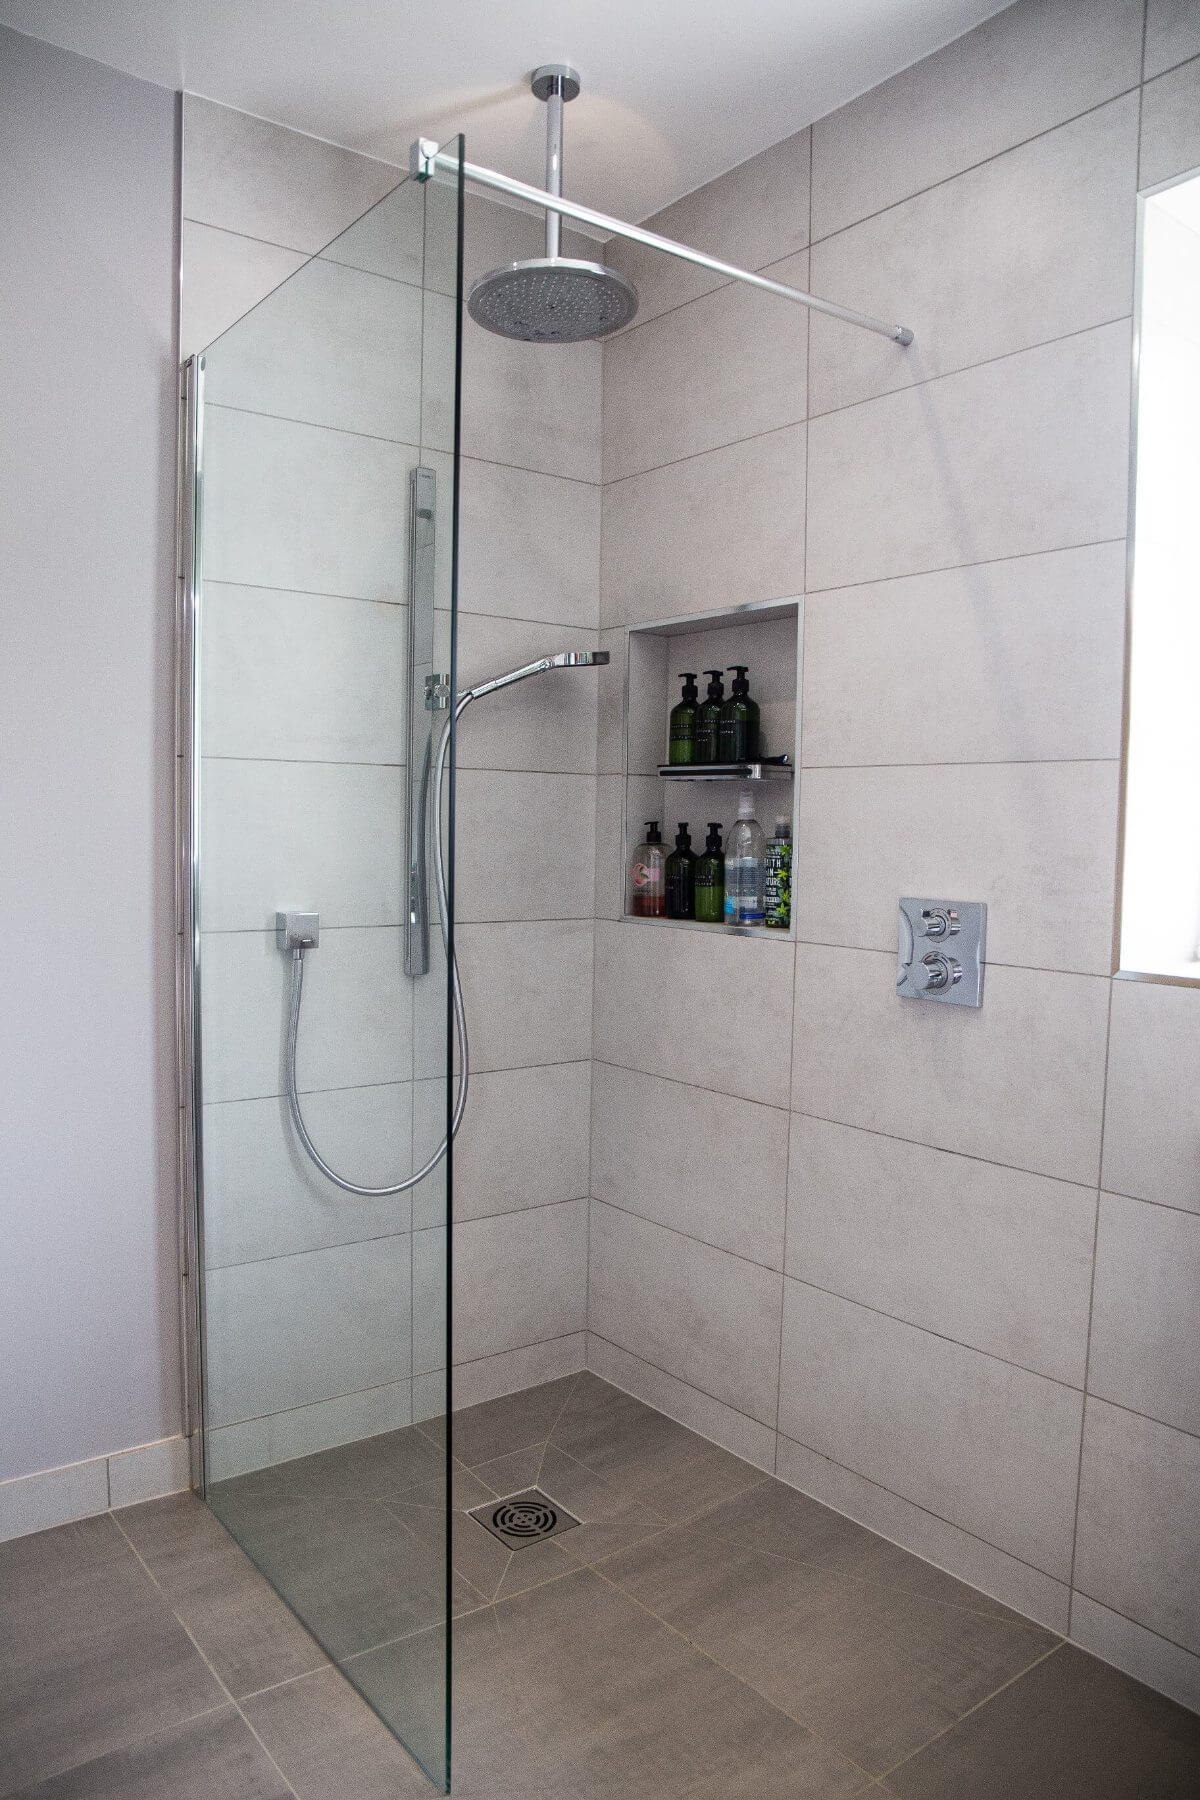 Accessible Wetroom